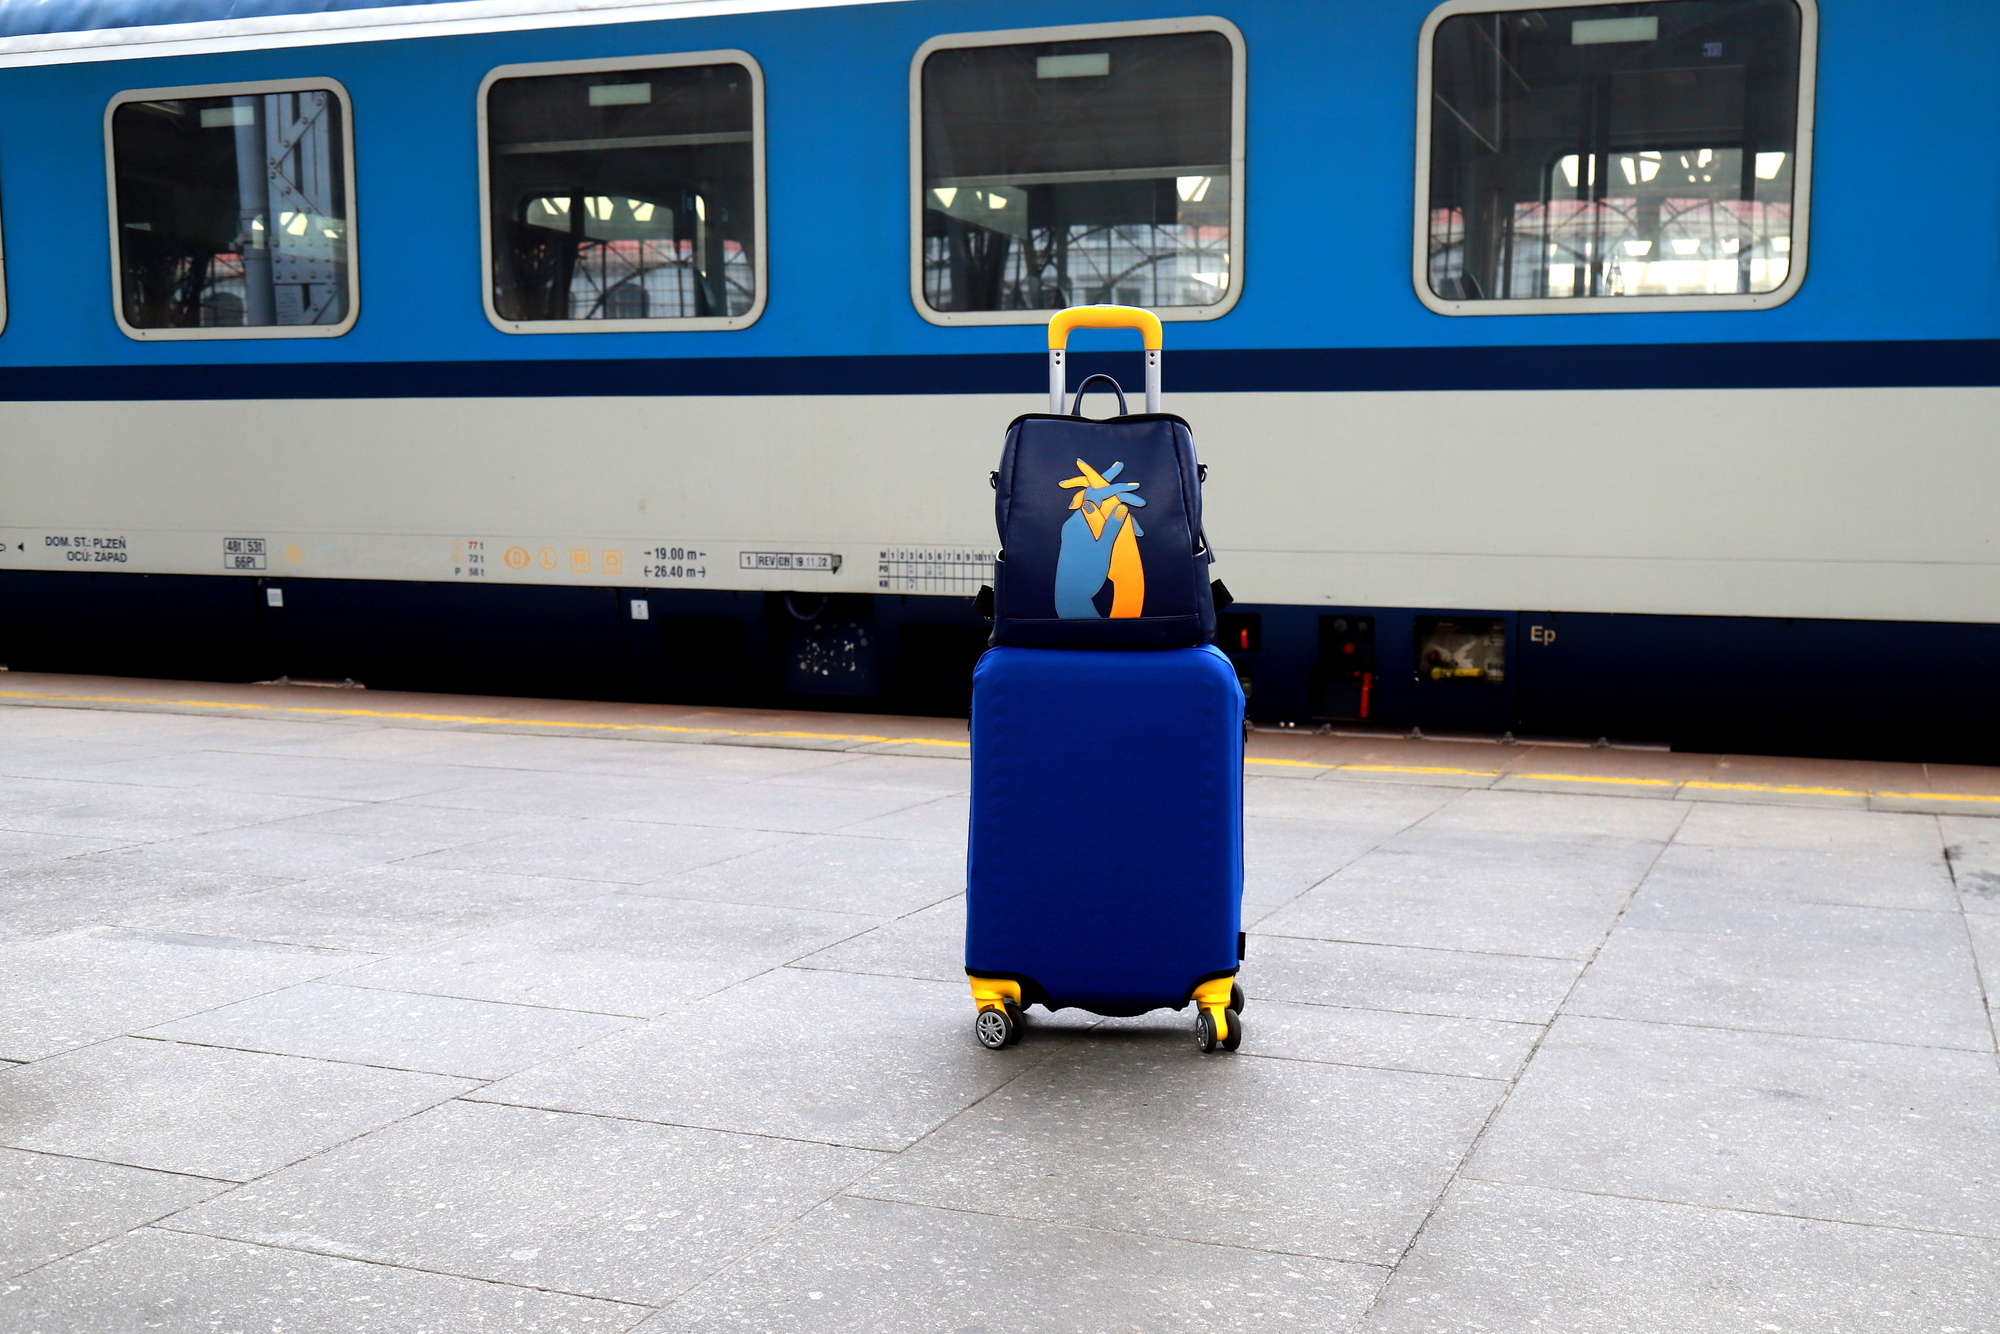 Suitcase and bag in colors of Ukraine flag at railway station, Prague, Czech Republic. Journey of Ukrainians, refugees, migrants. Travel, vacation, weekends, refugee, emigrant